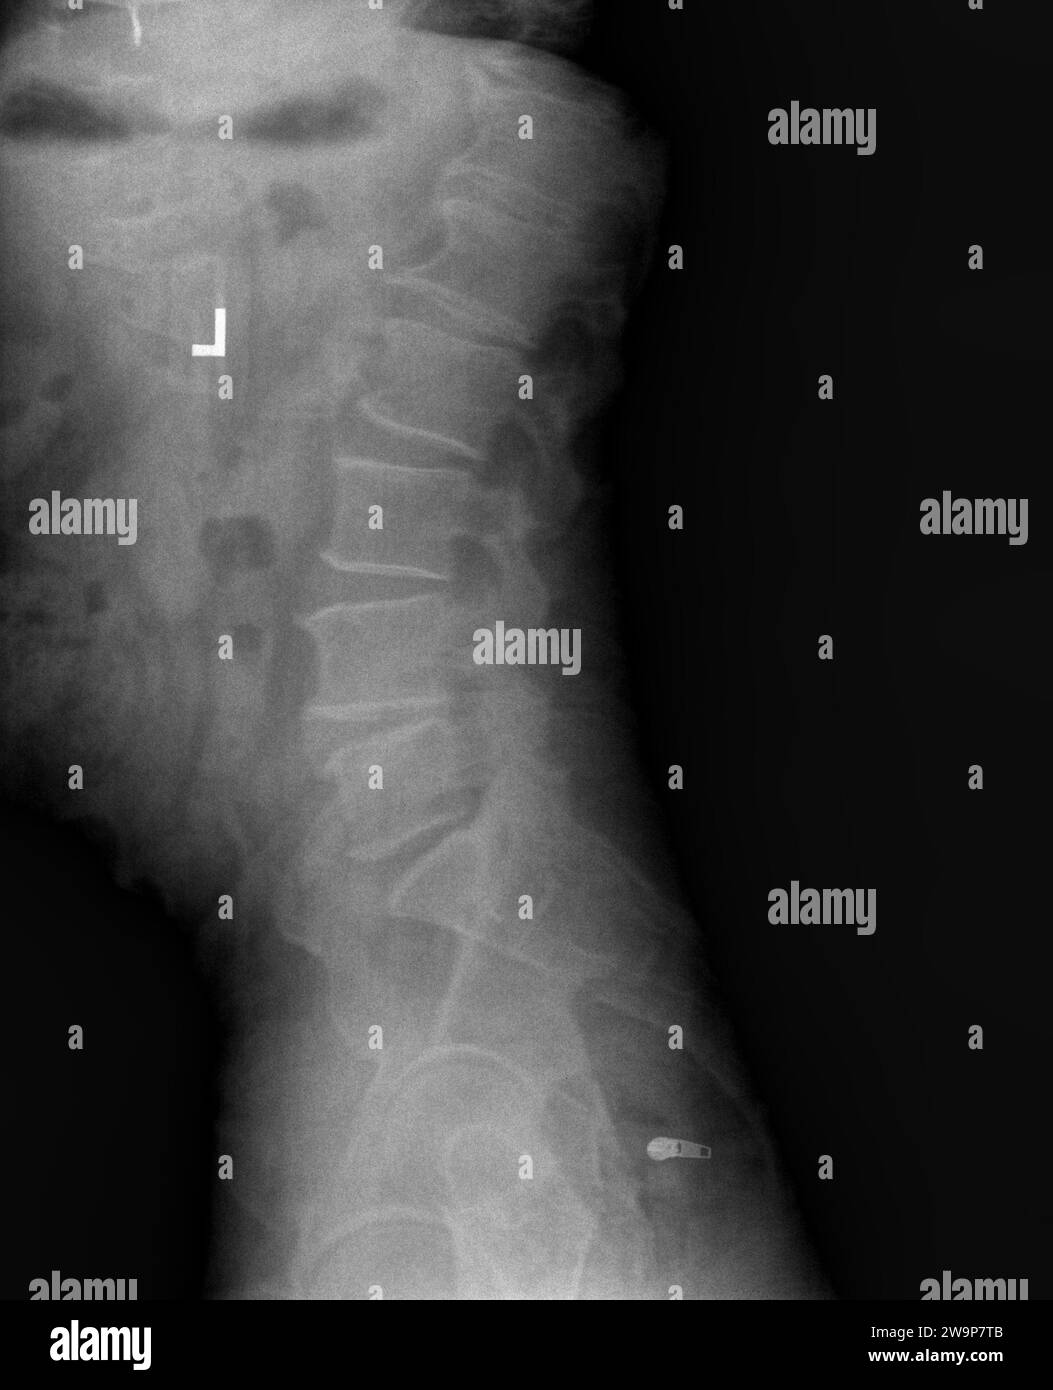 Film xray or radiograph of lumbar low back vertebrae showing facet joint syndrome of L4 L5 area which is an arthritis-like condition of the spine that Stock Photo